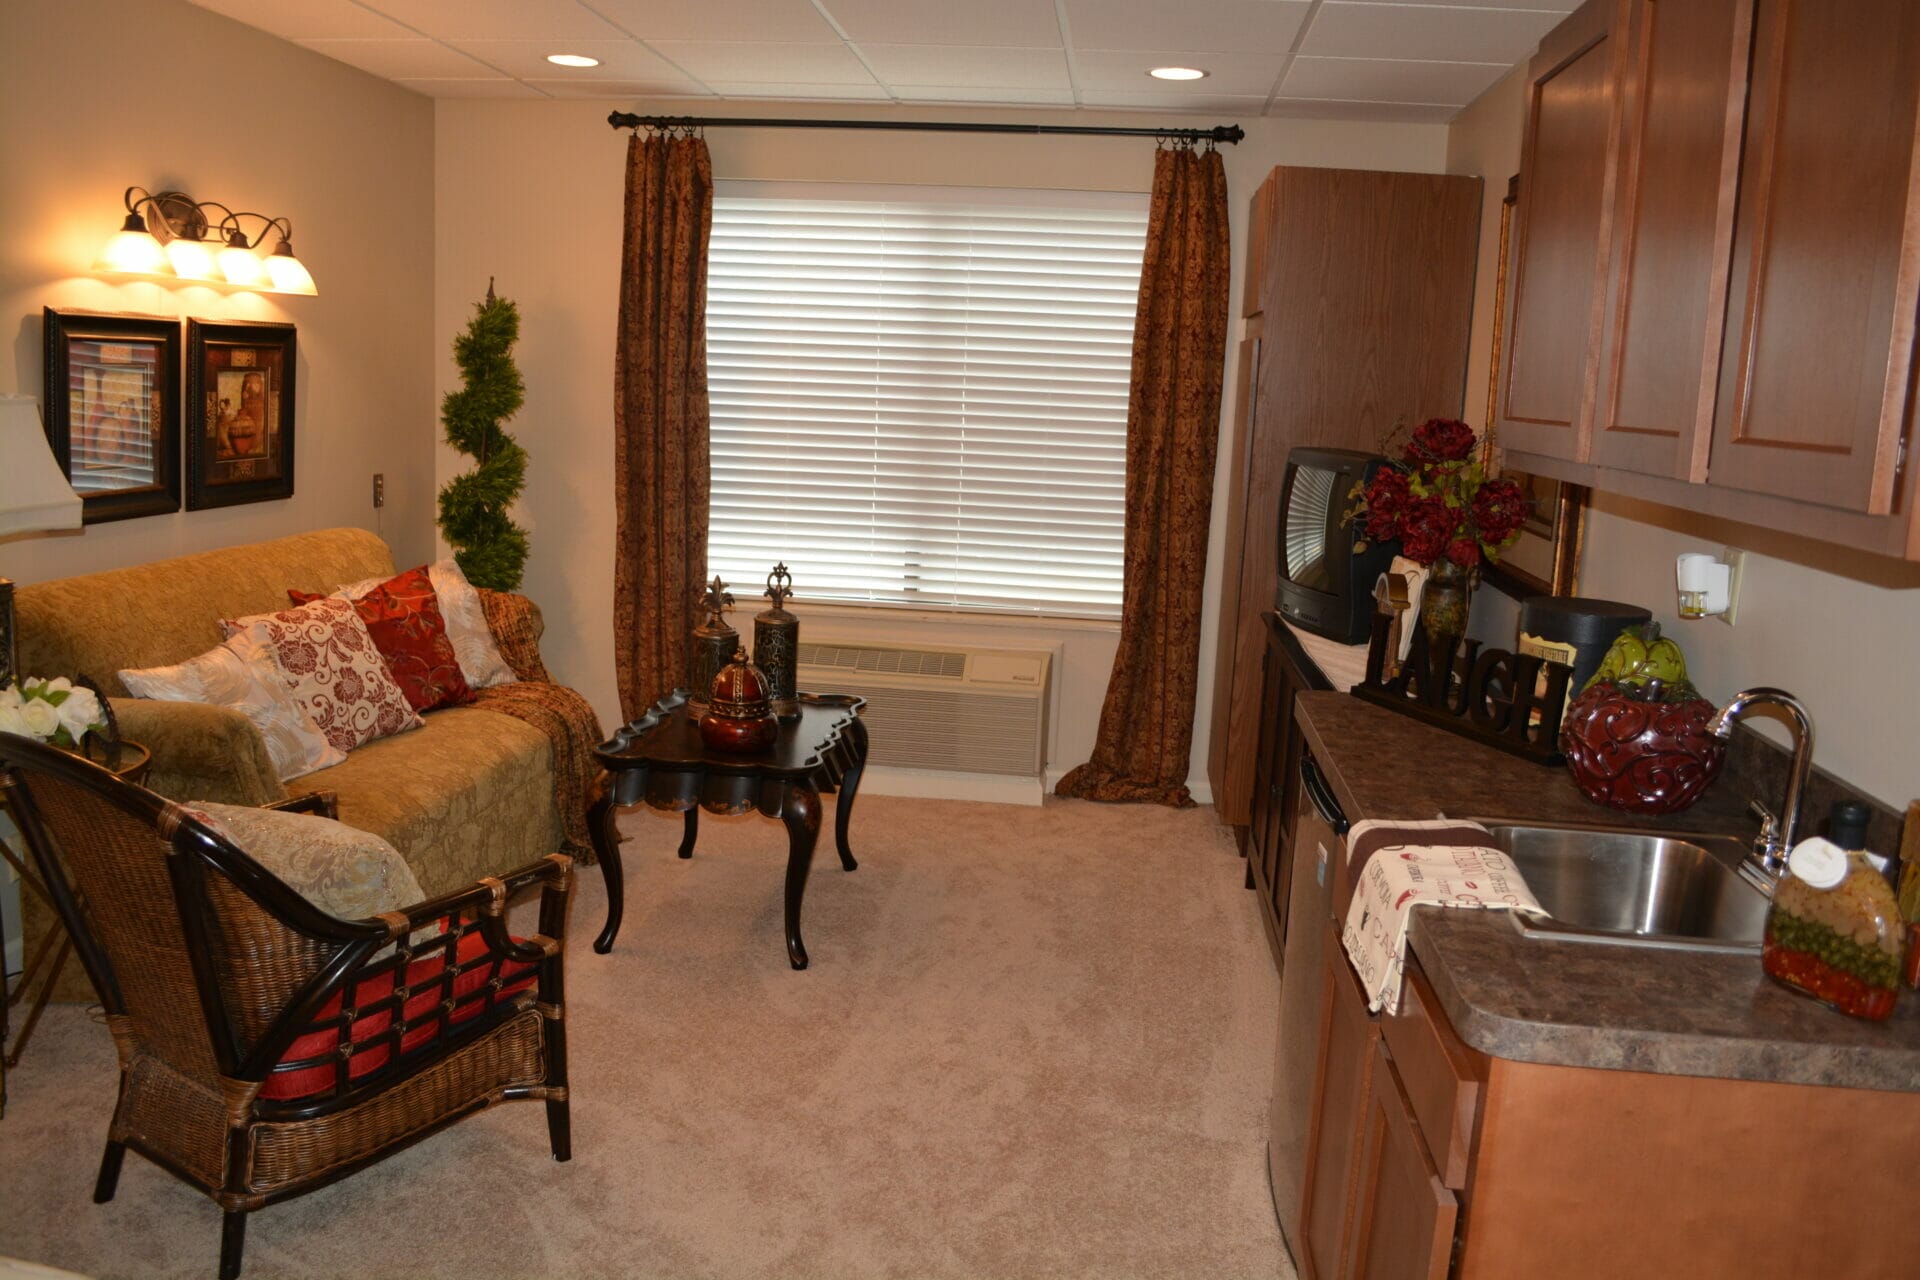 <span  class="uc_style_uc_tiles_grid_image_elementor_uc_items_attribute_title" style="color:#000000;">The kitchenette across from the living room in Bethany Village Assisted Living Apartments</span>